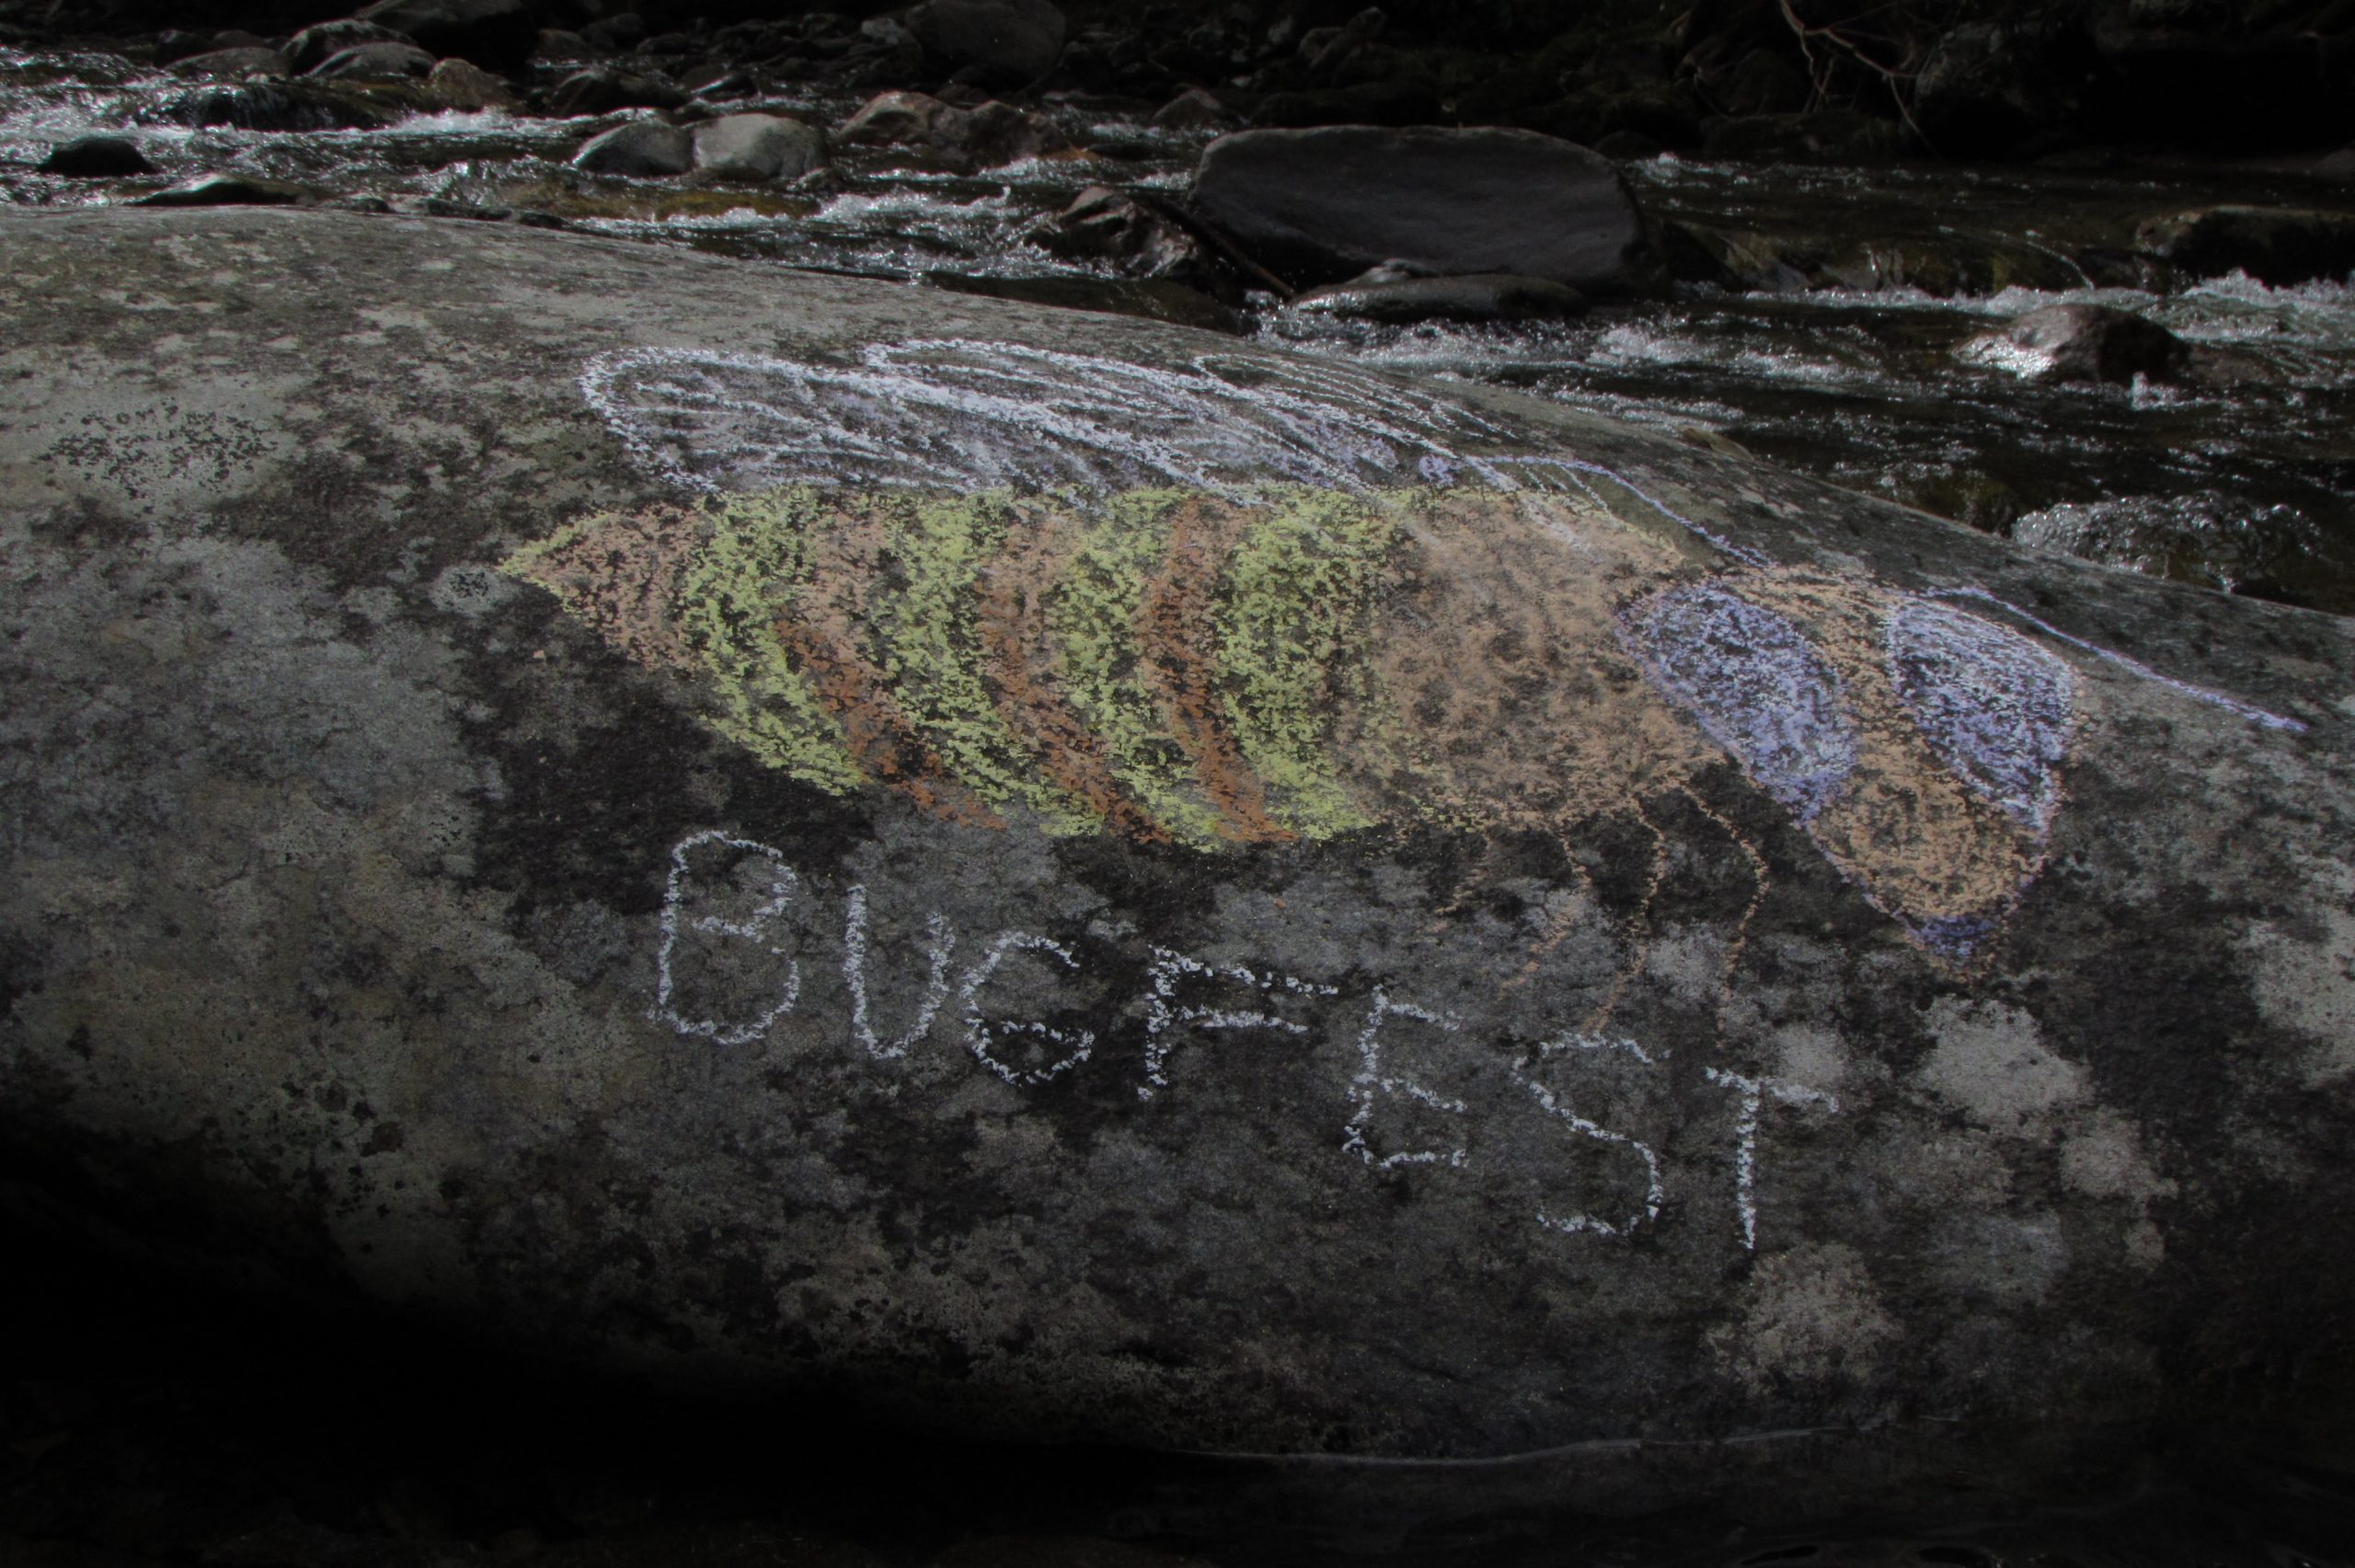 A chalk bee on a rock next to a river